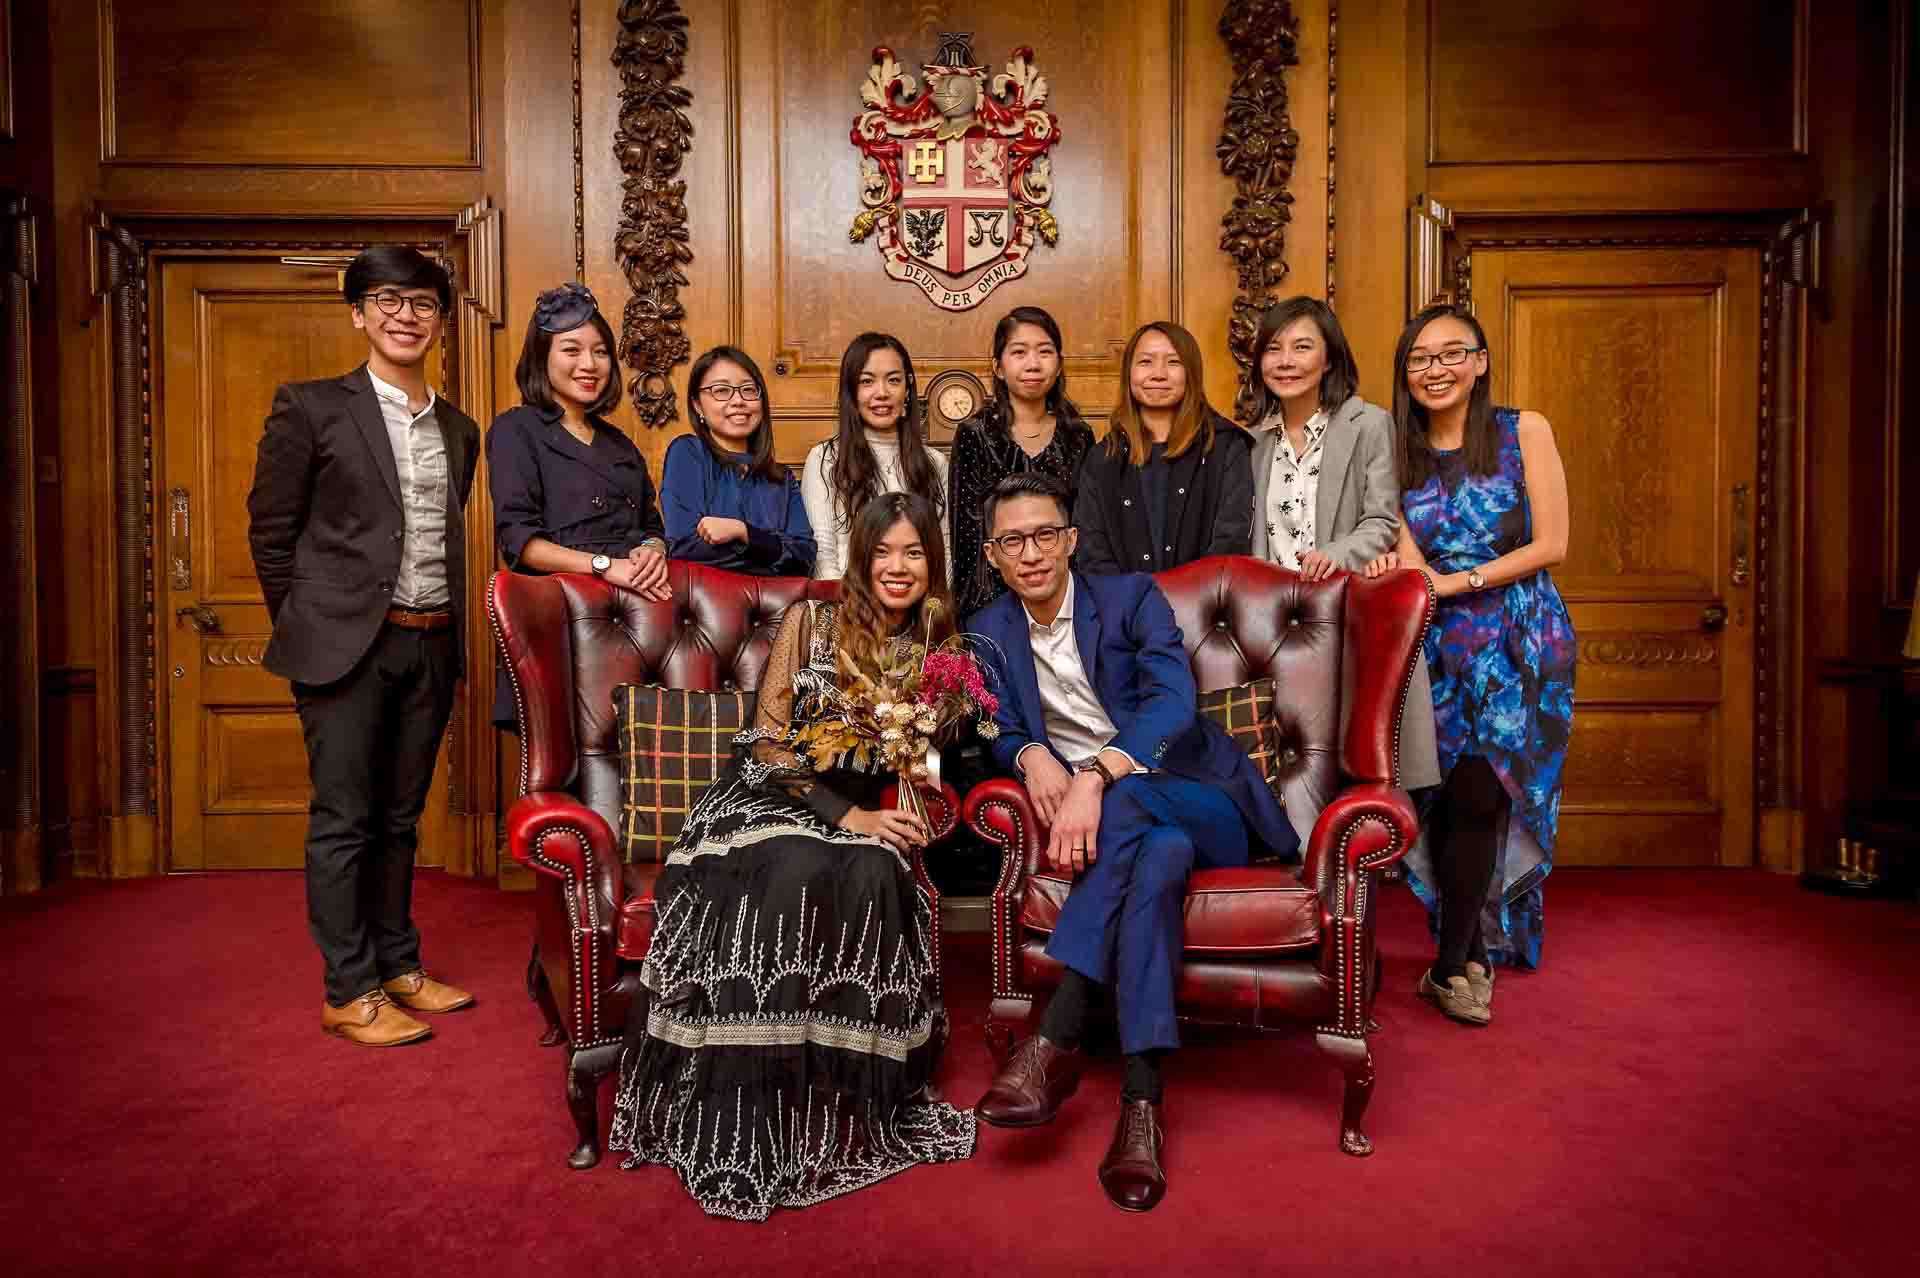 Group Portrait of wedding party in the Mayors Parlour of Islington Town Hall